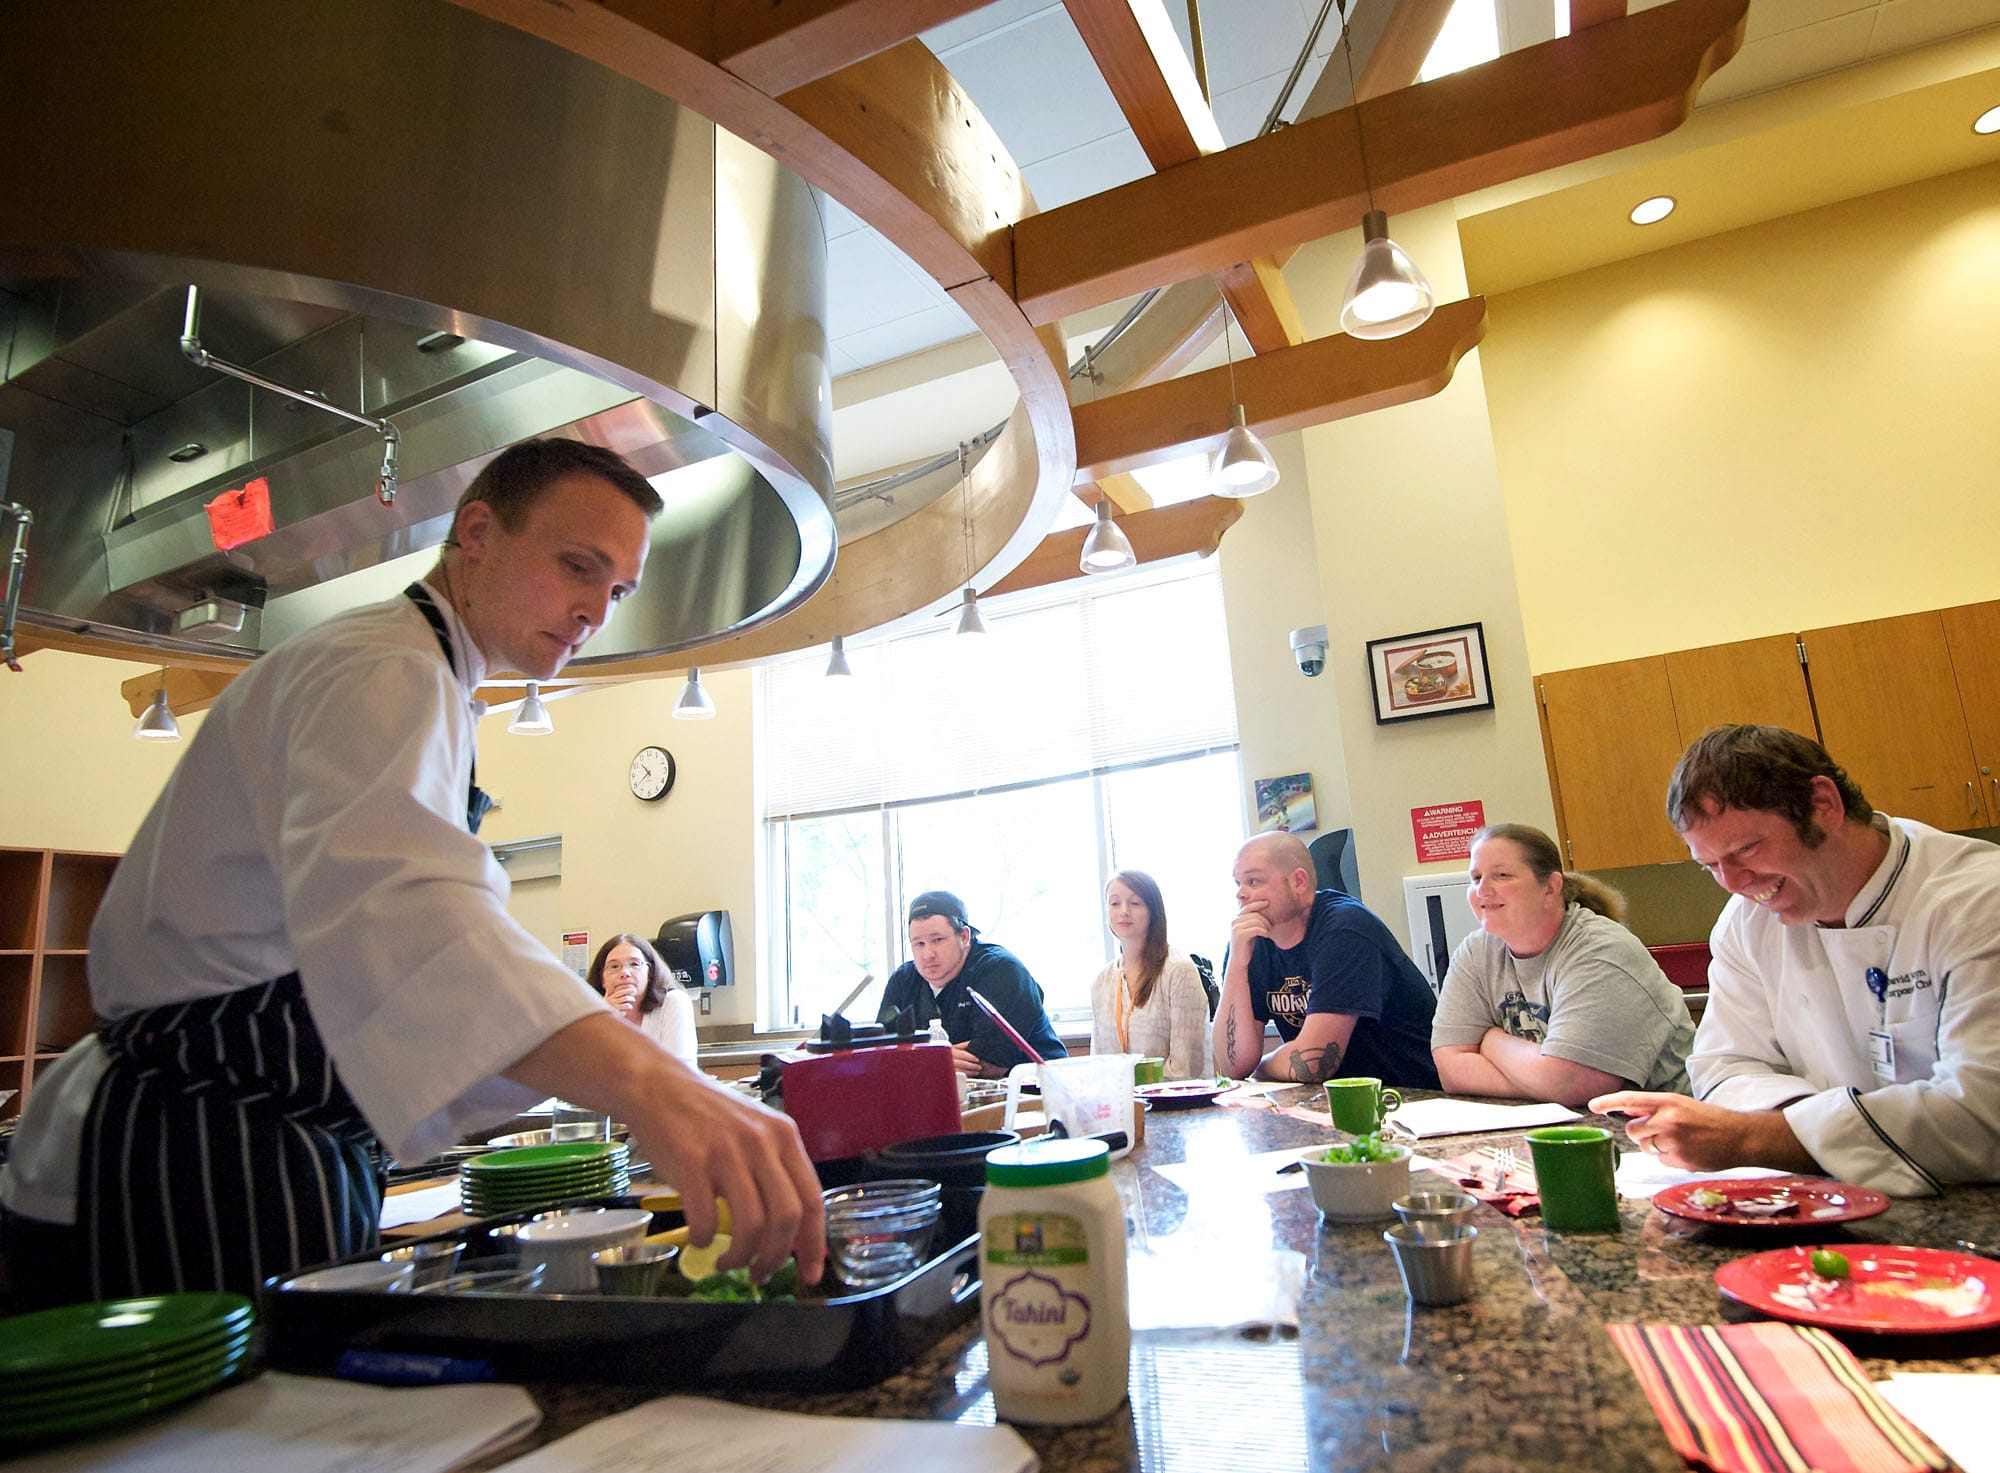 Garrett Berdan, a chef and registered dietitian from Bend, Ore., demonstrates techniques for enhancing the flavors of spices and using more flavorful ingredients during a class for local chefs Wednesday.